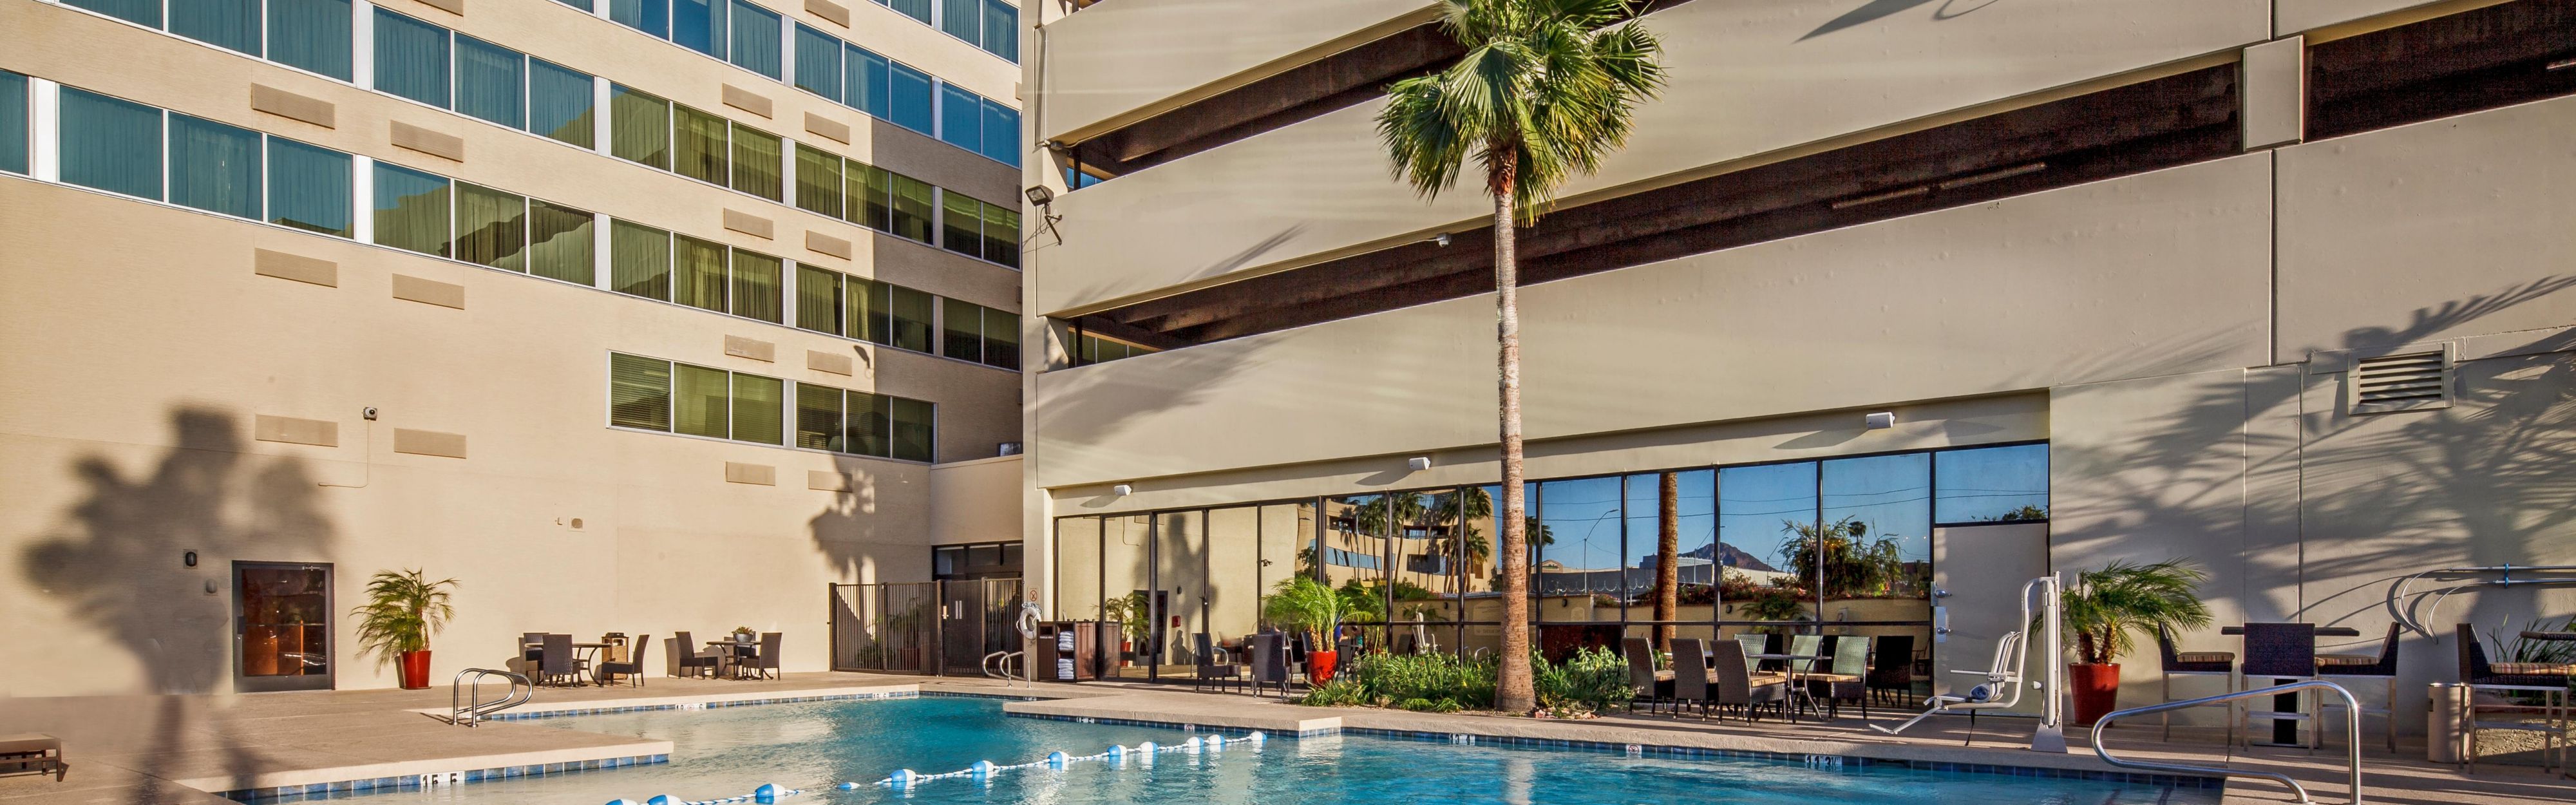 Take a Dip and Chill Out in Our Luxurious All-Season Swimming Pool